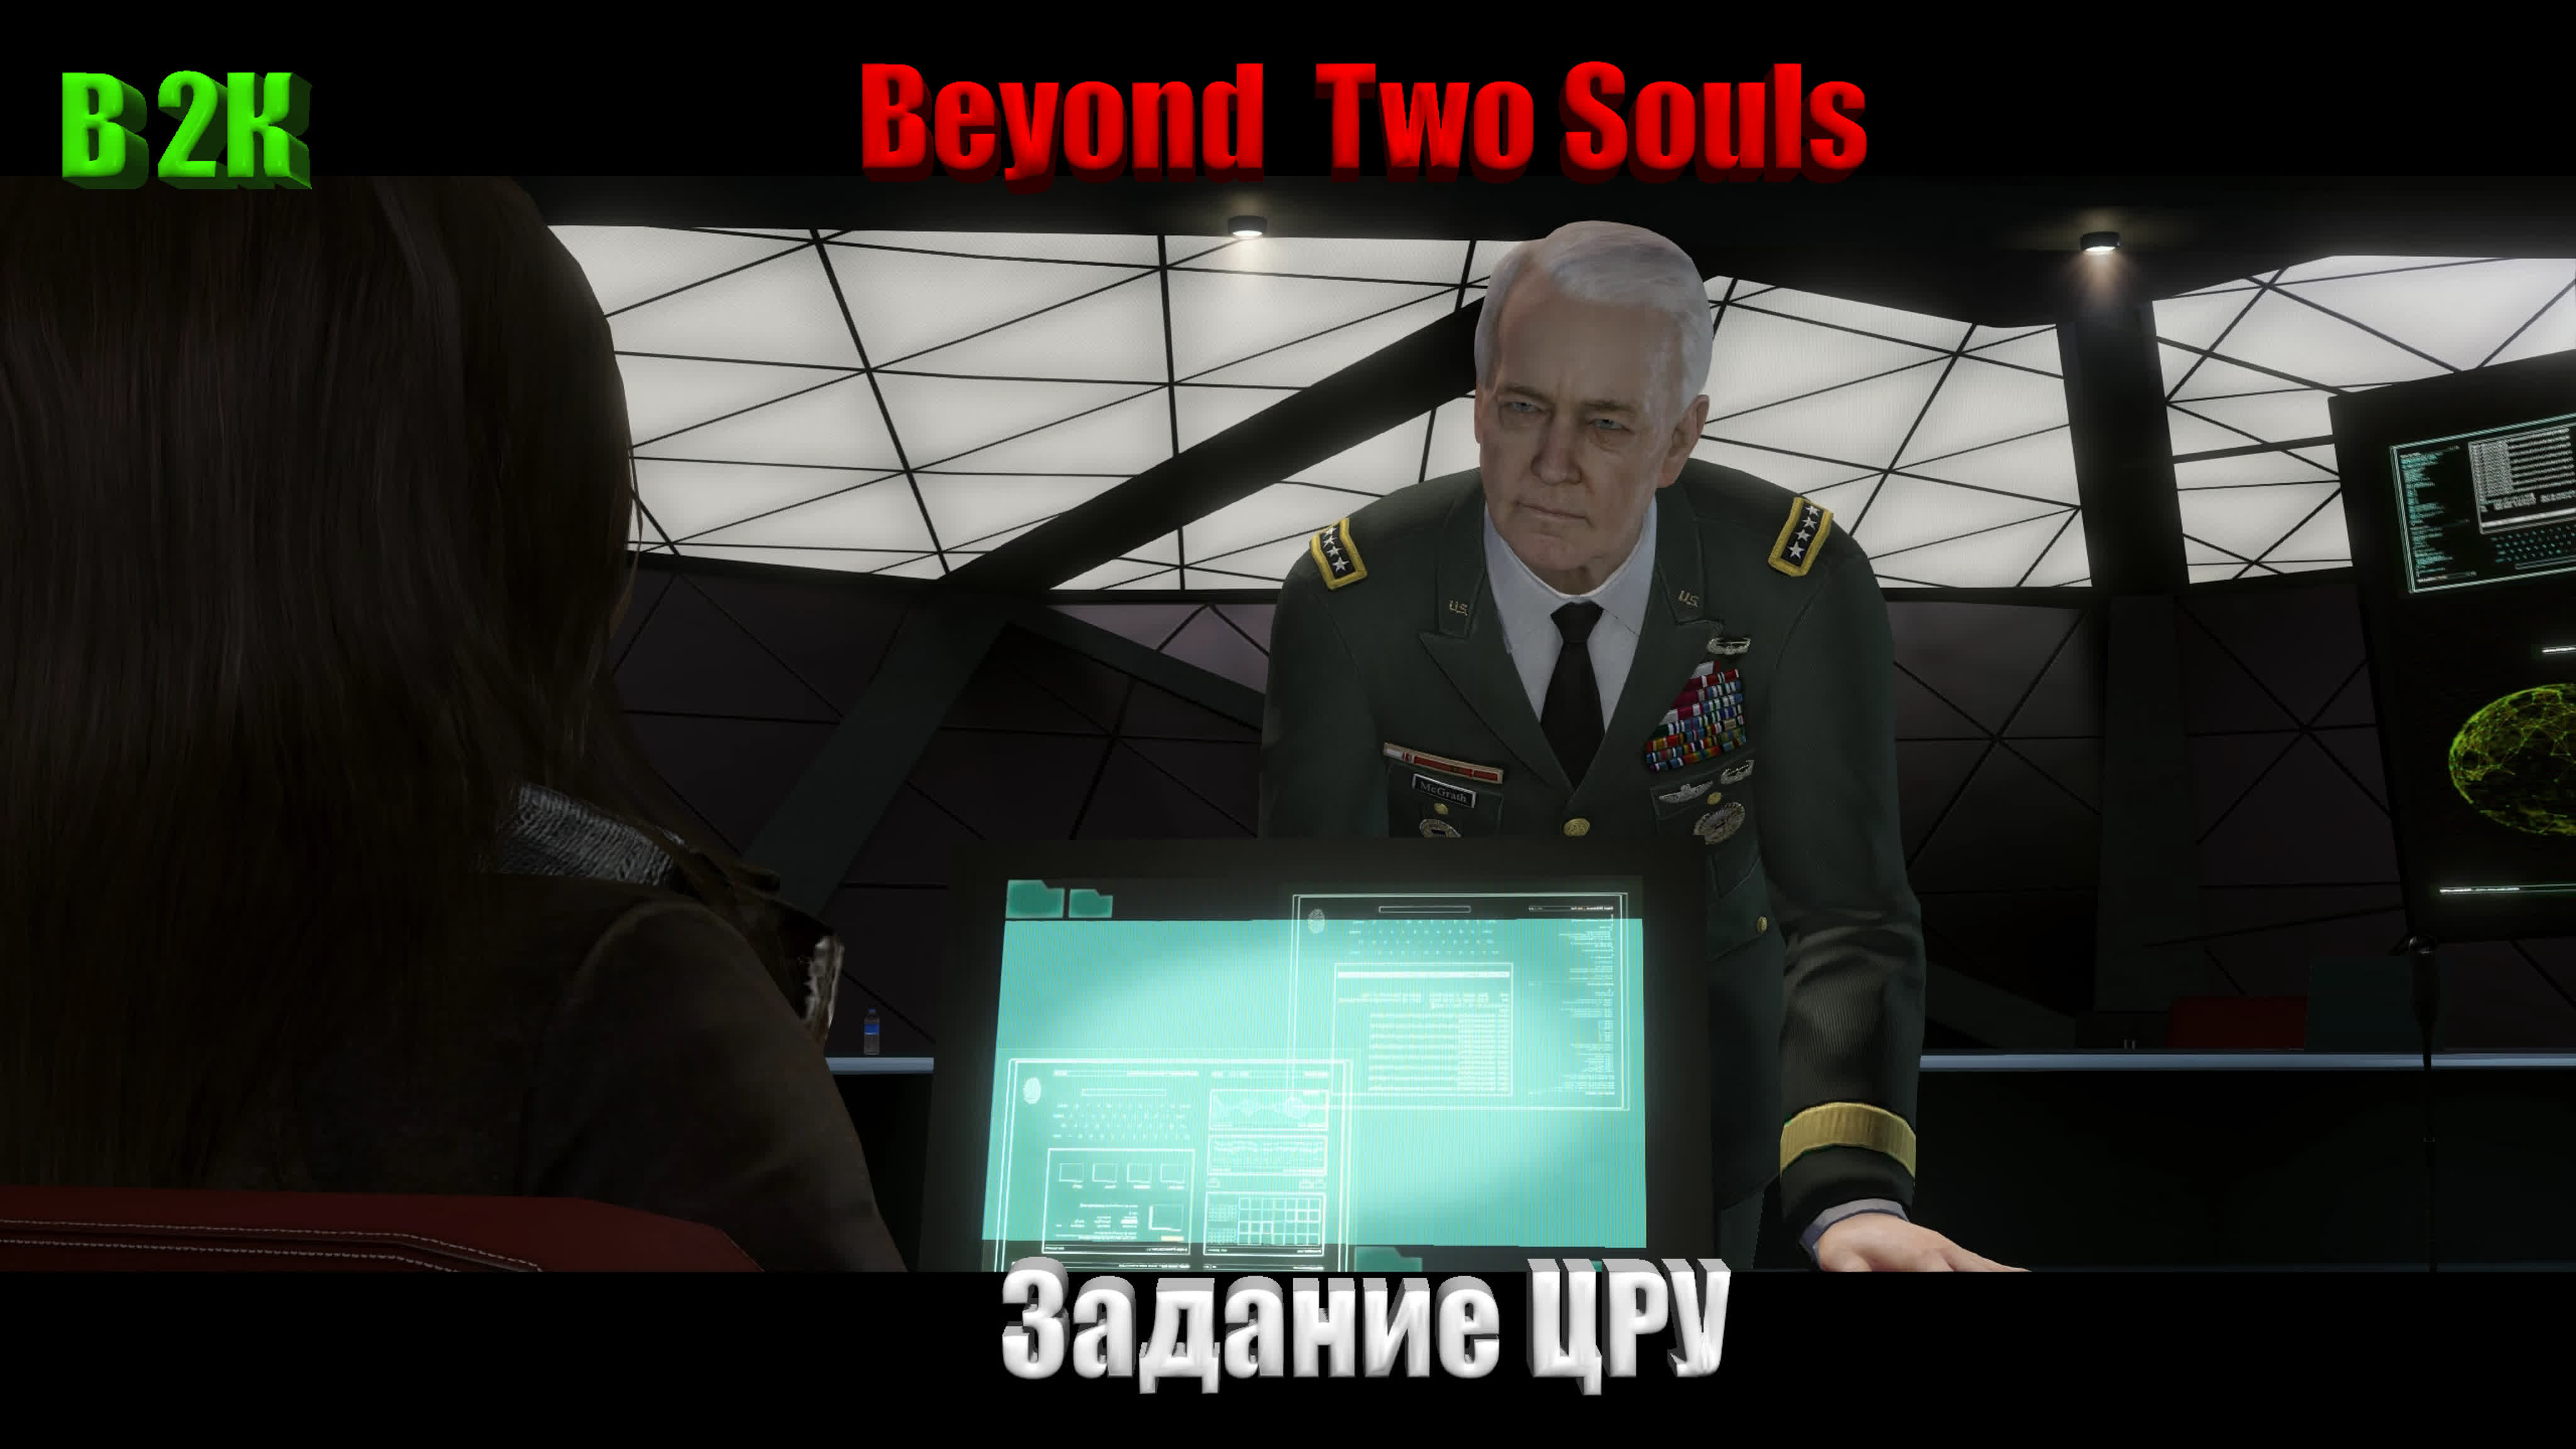 clifford crites recommends Beyond Two Souls Blowjob